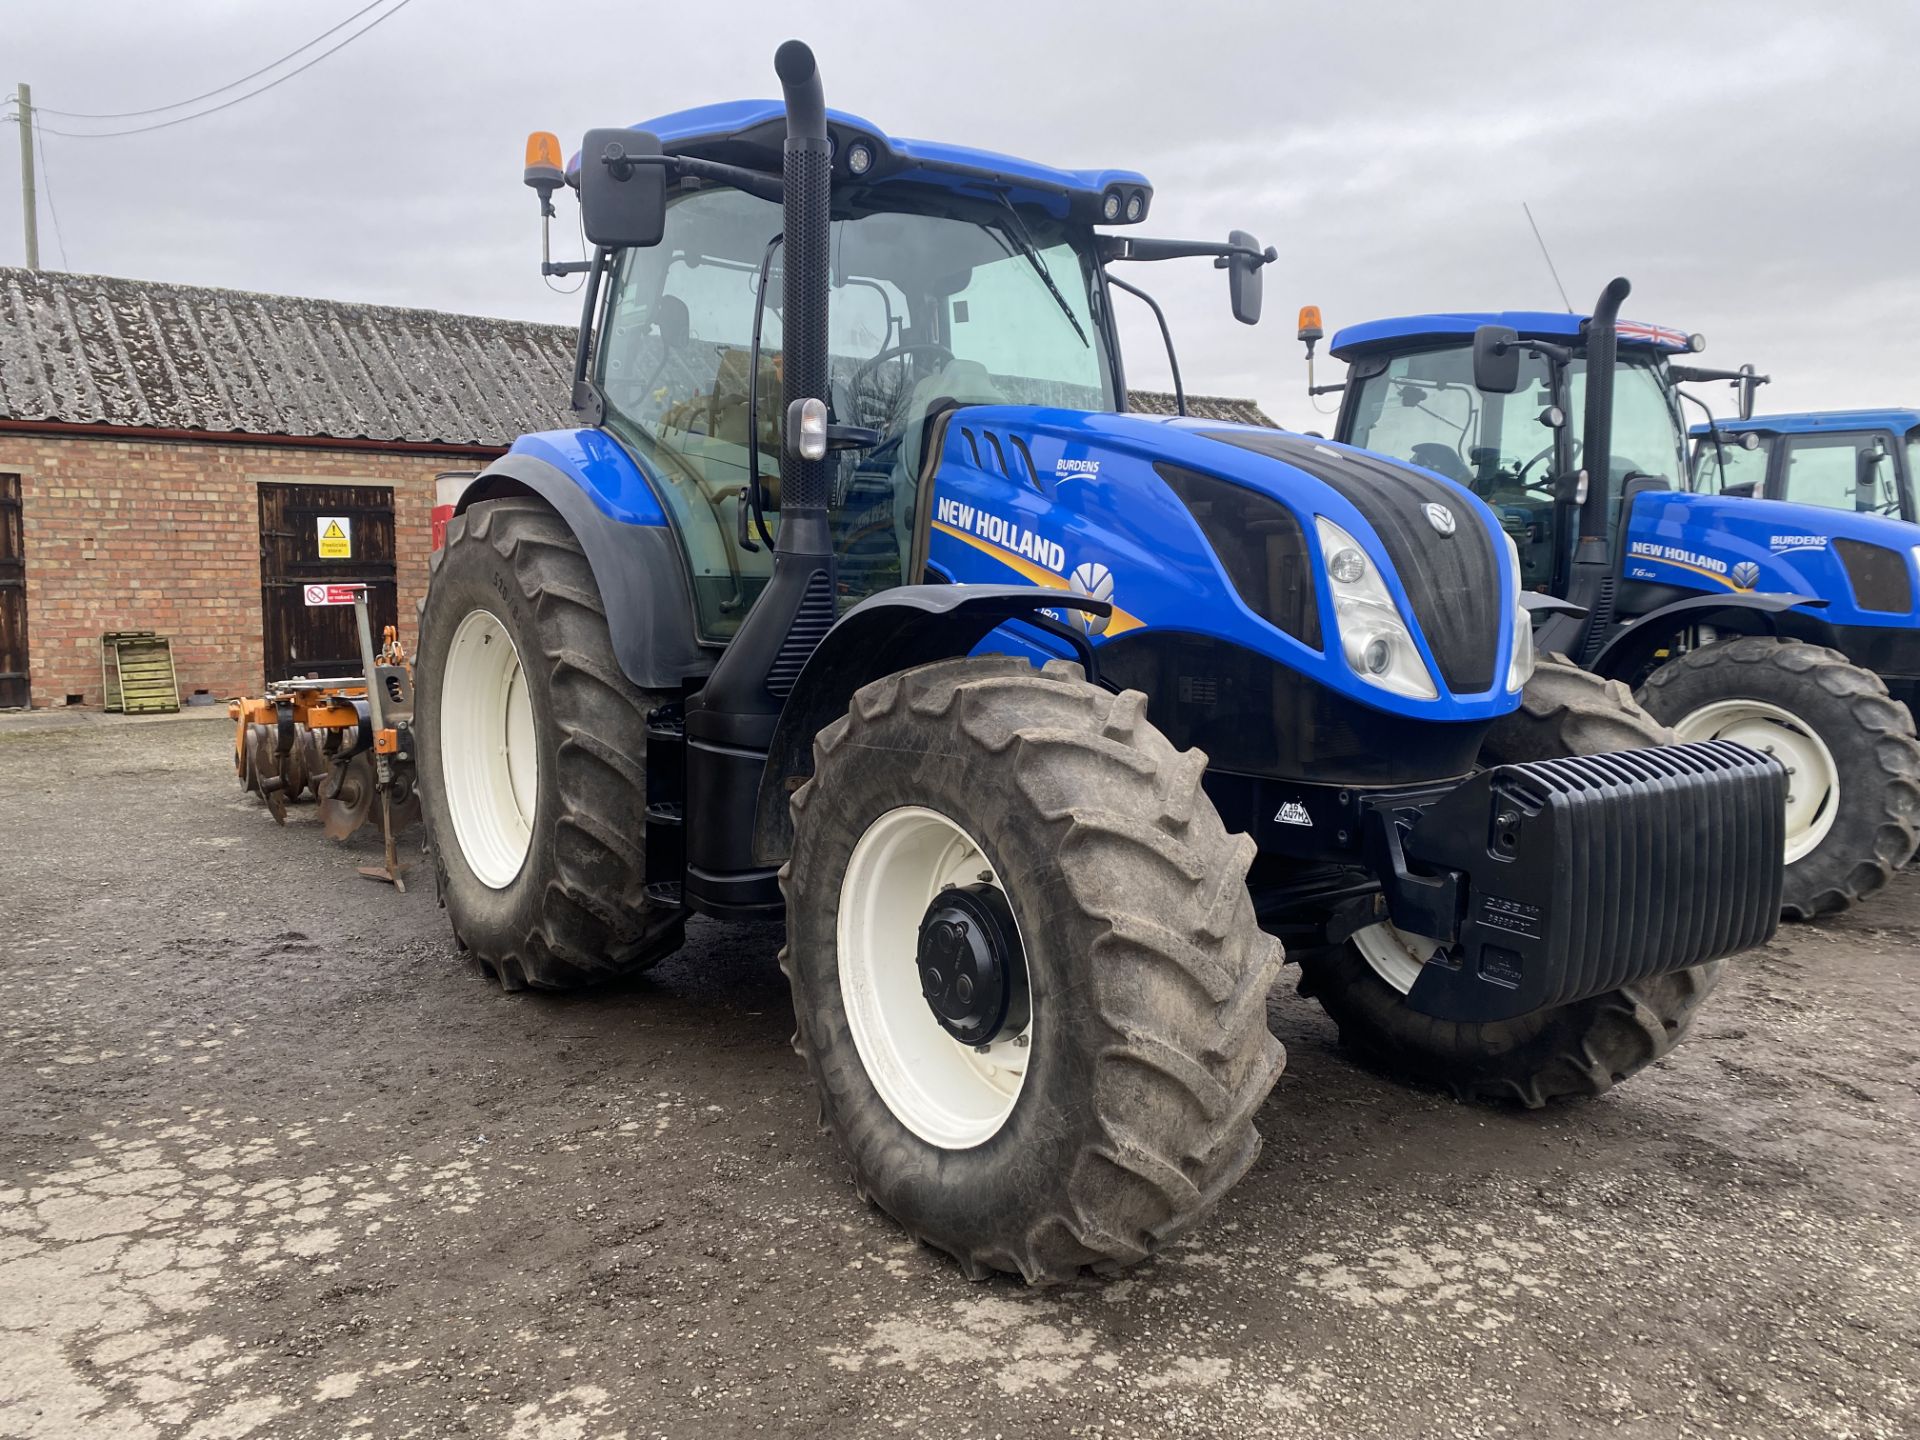 (17) New Holland T6 180 4wd tractor, 50k, Air Brakes, 6 cylinder, 150 hp, 2,900 hrs, Air Con, sold - Bild 3 aus 3